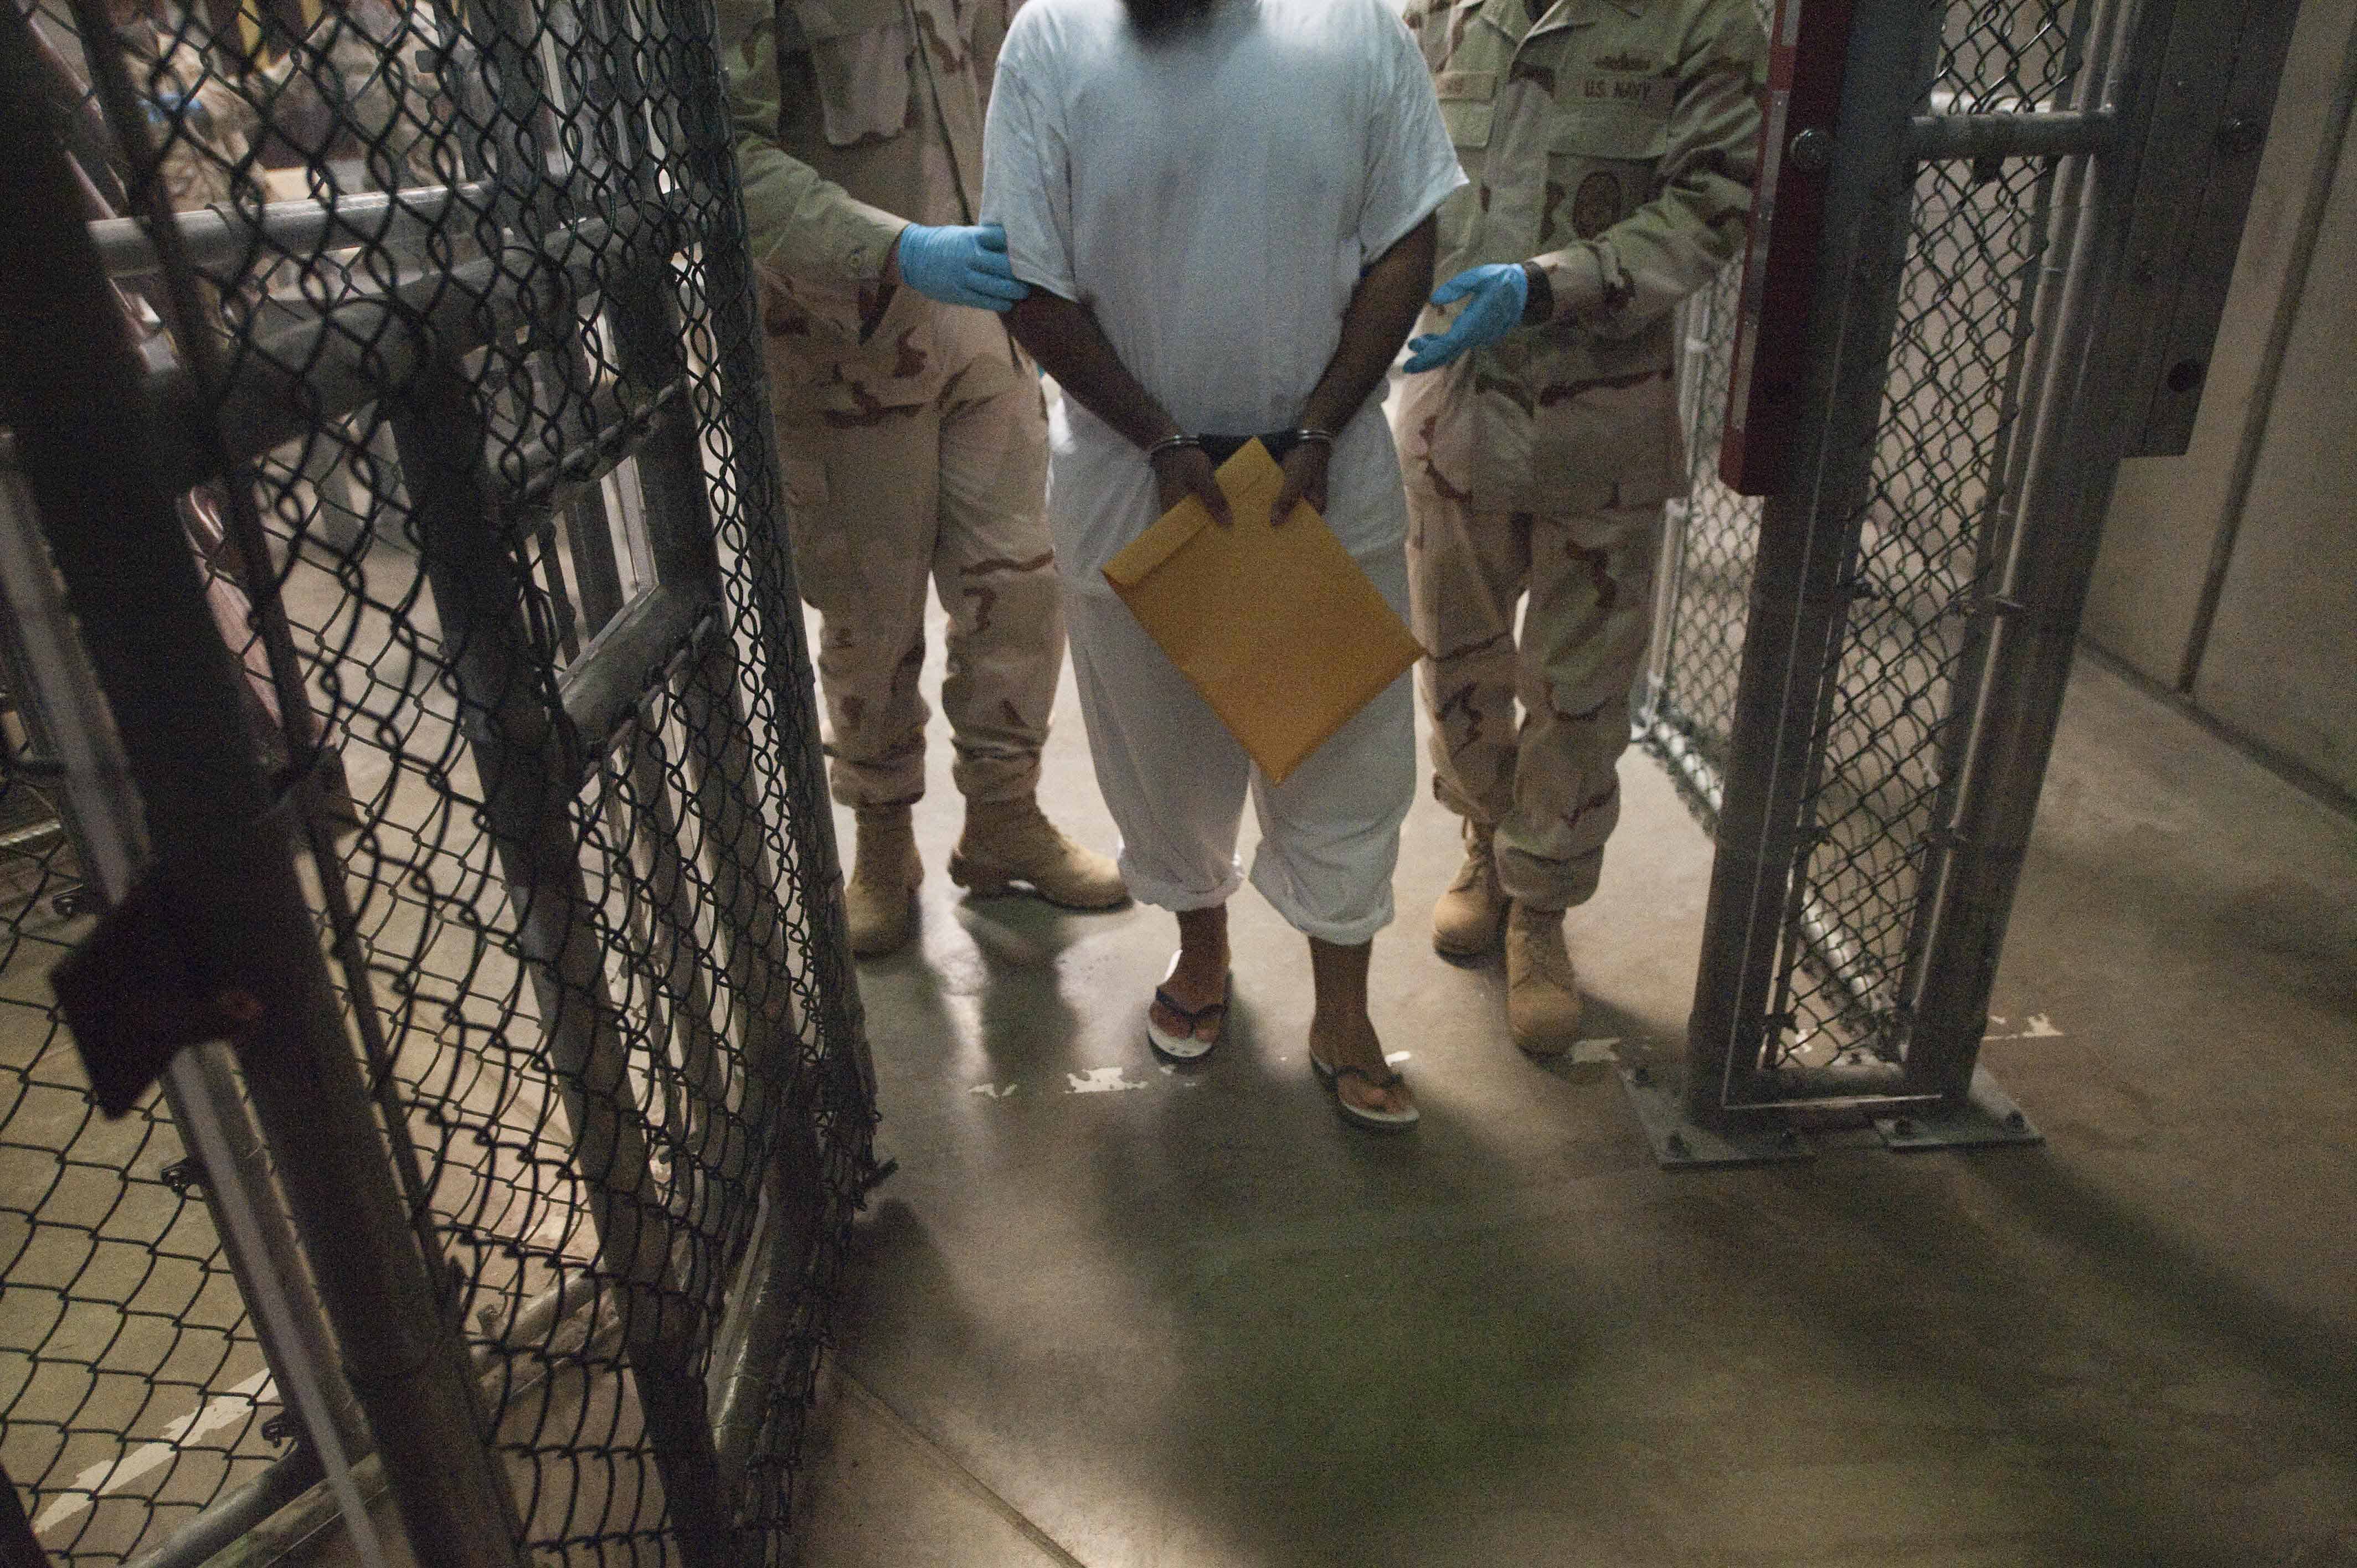 A March 30, 2010 file photo shows U.S. military guards as they move a detainee inside Camp VI at Guantanamo Bay, Cuba.